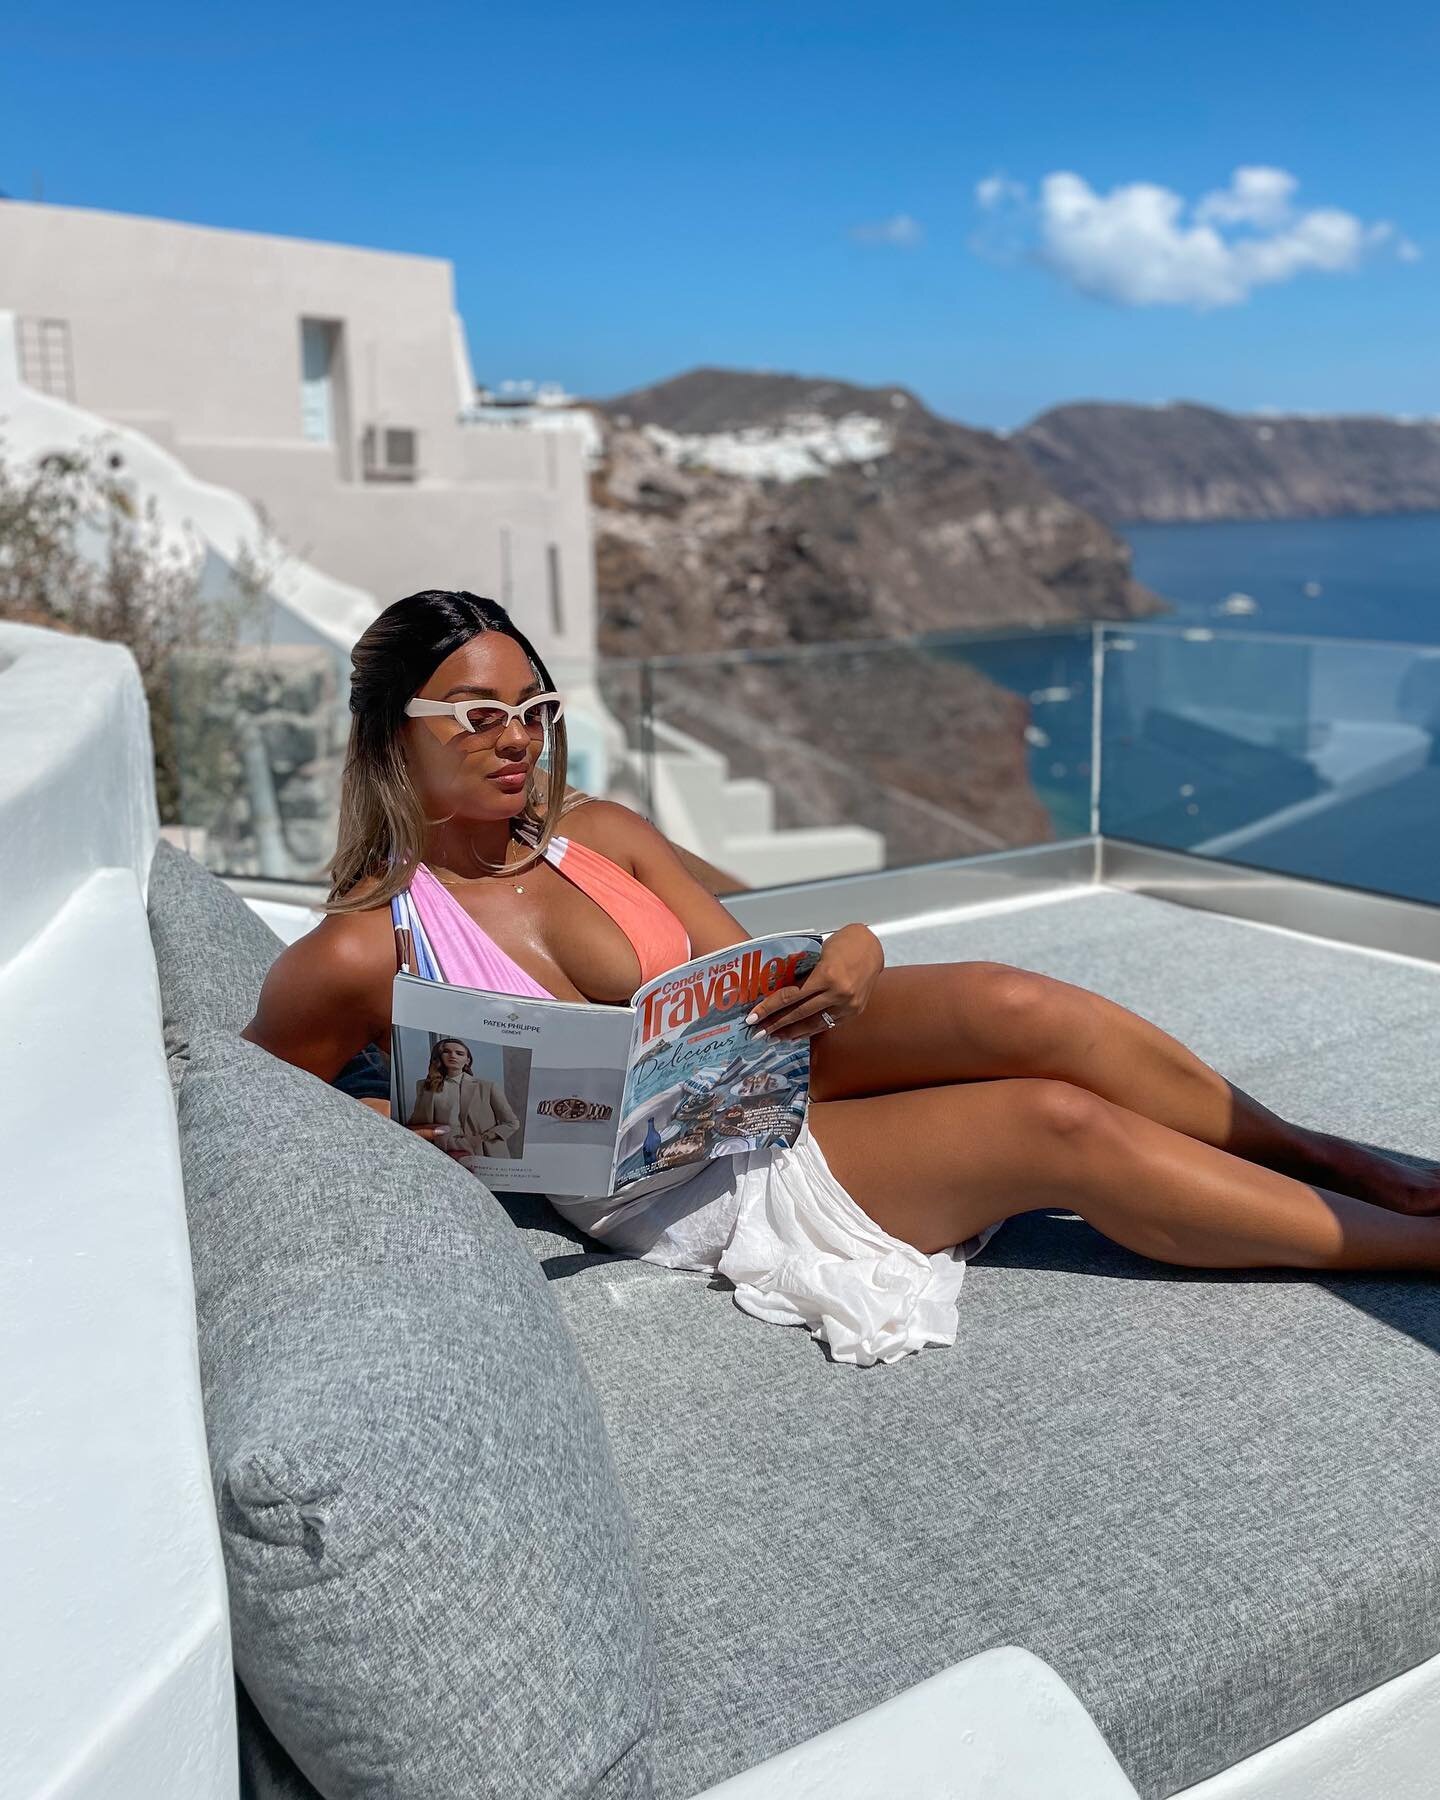 Things I love about Santorini - let&rsquo;s go!

1. The view from every corner is out of this world. It looks like it was designed by angels 

2. The cave villas are iconic, and ooze luxury. You get your own private space, with uninterrupted views, a